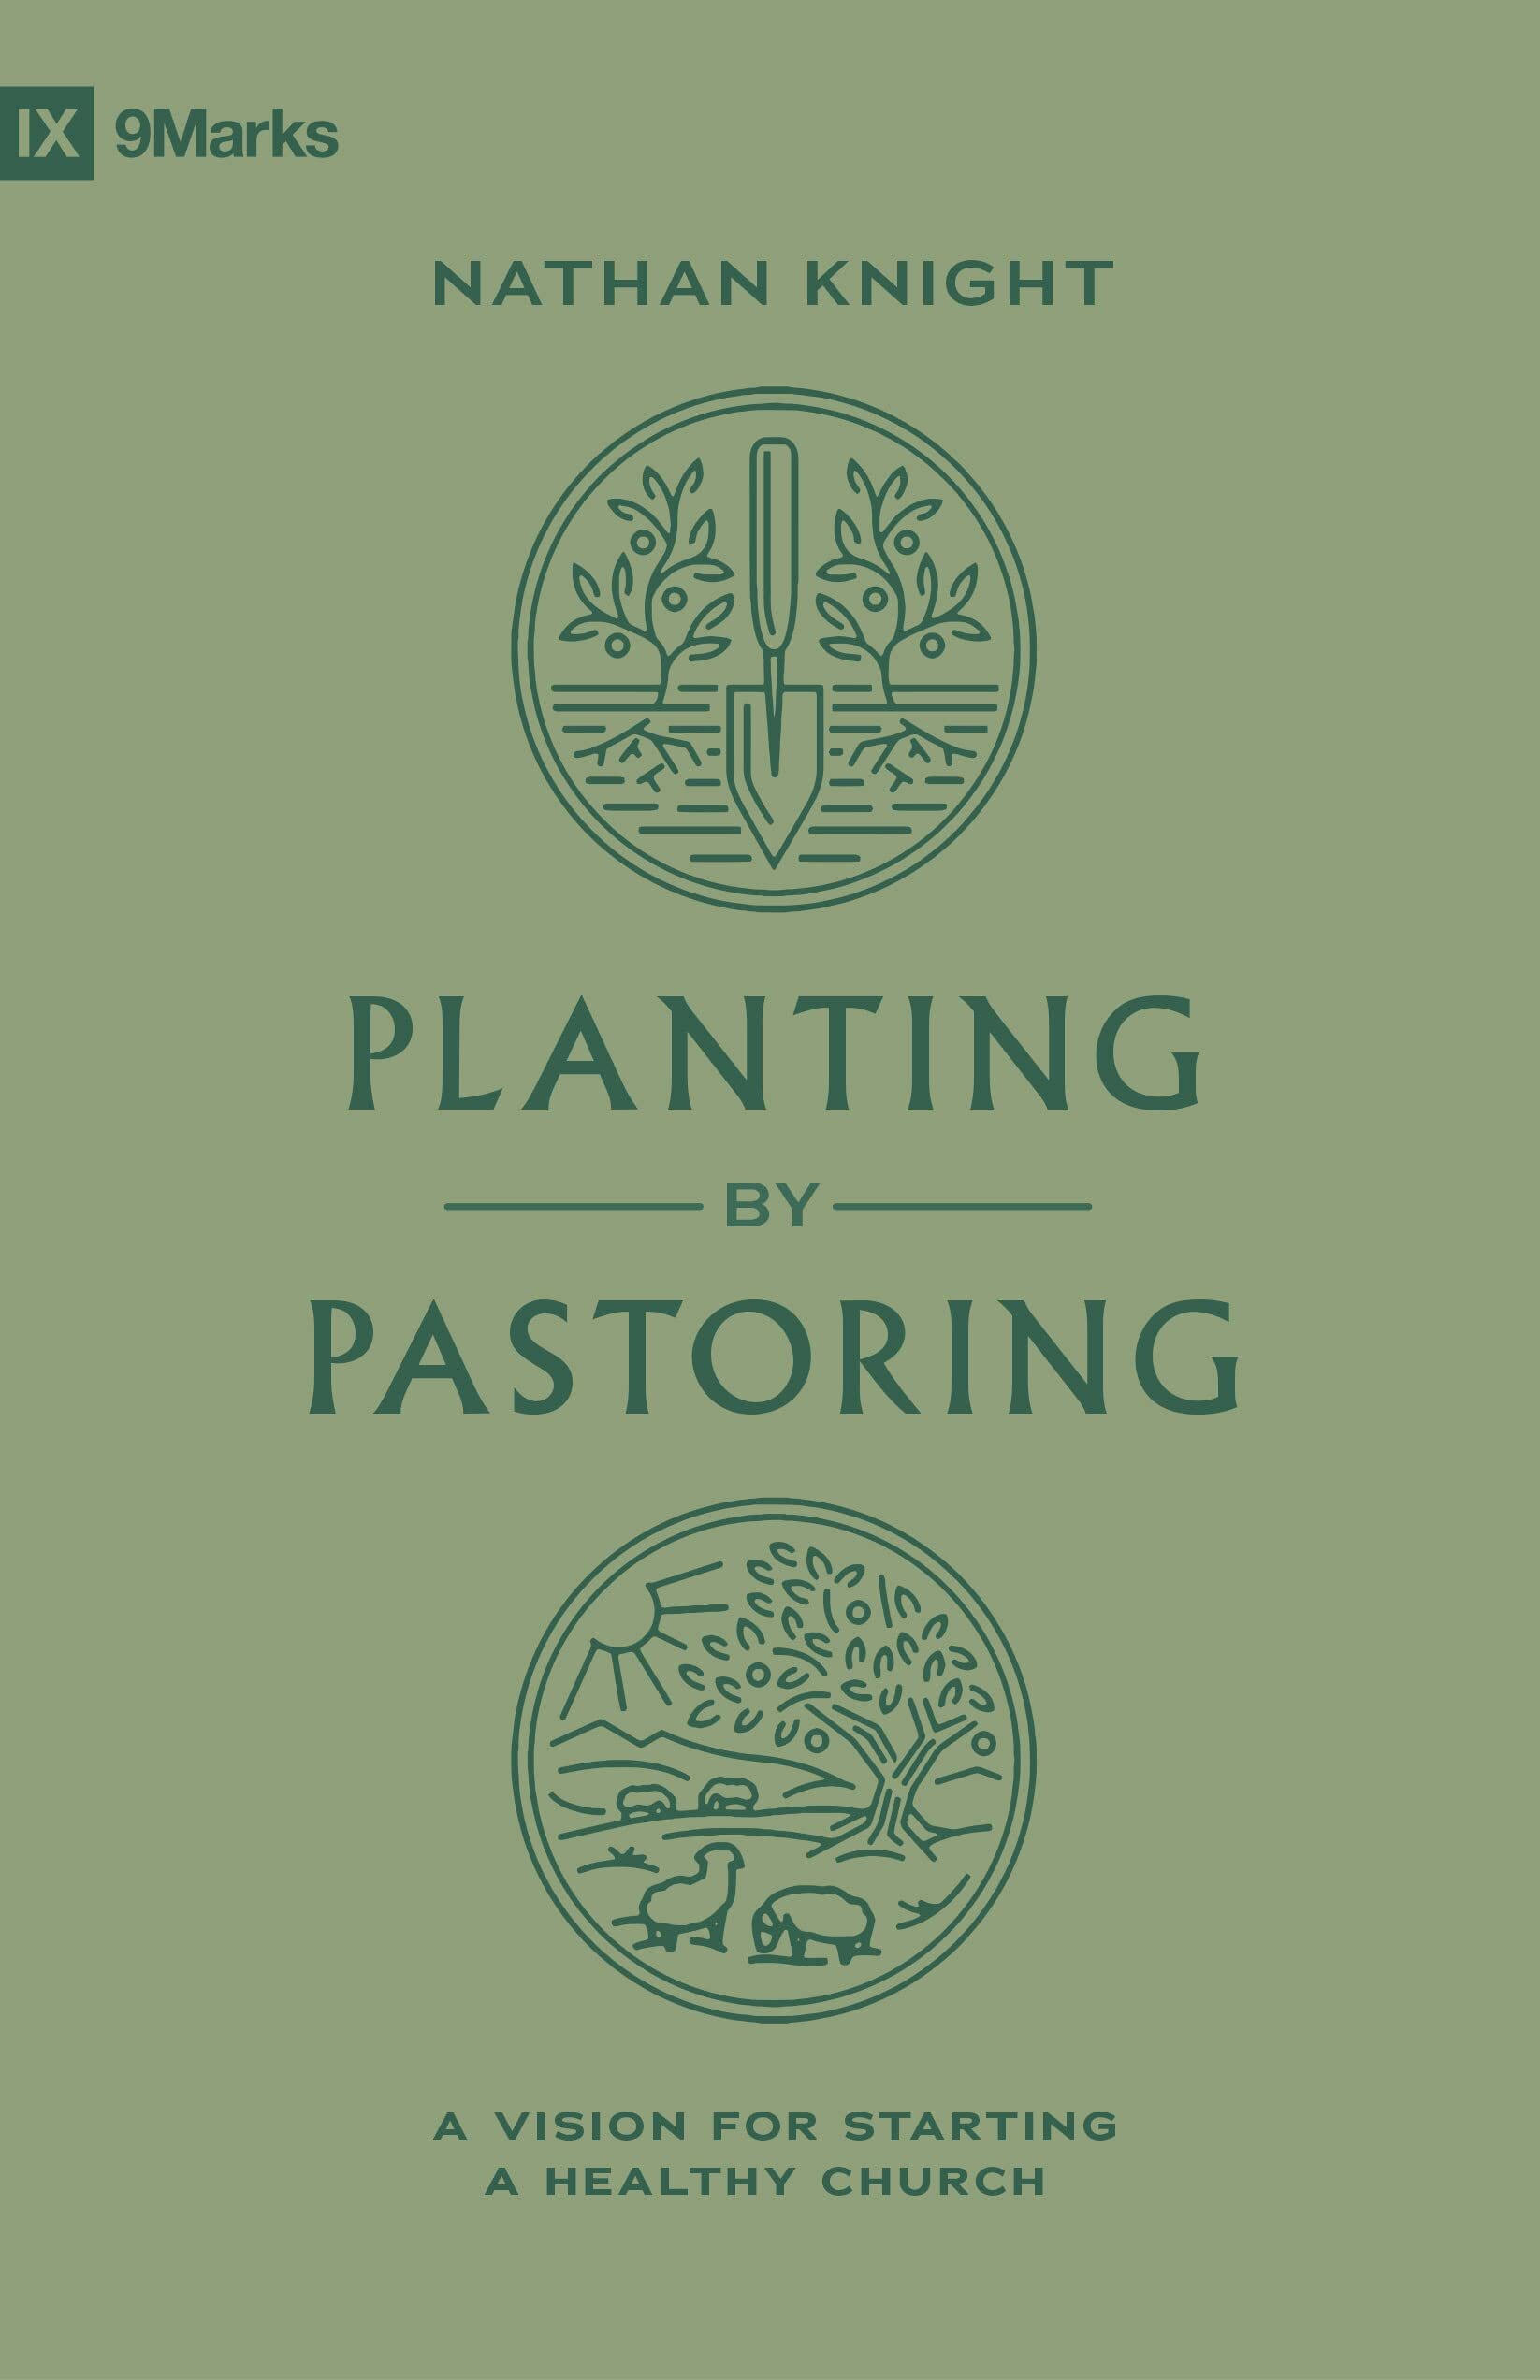 Planting by Pastoring: A Vision for Starting a Healthy Church (9Marks)